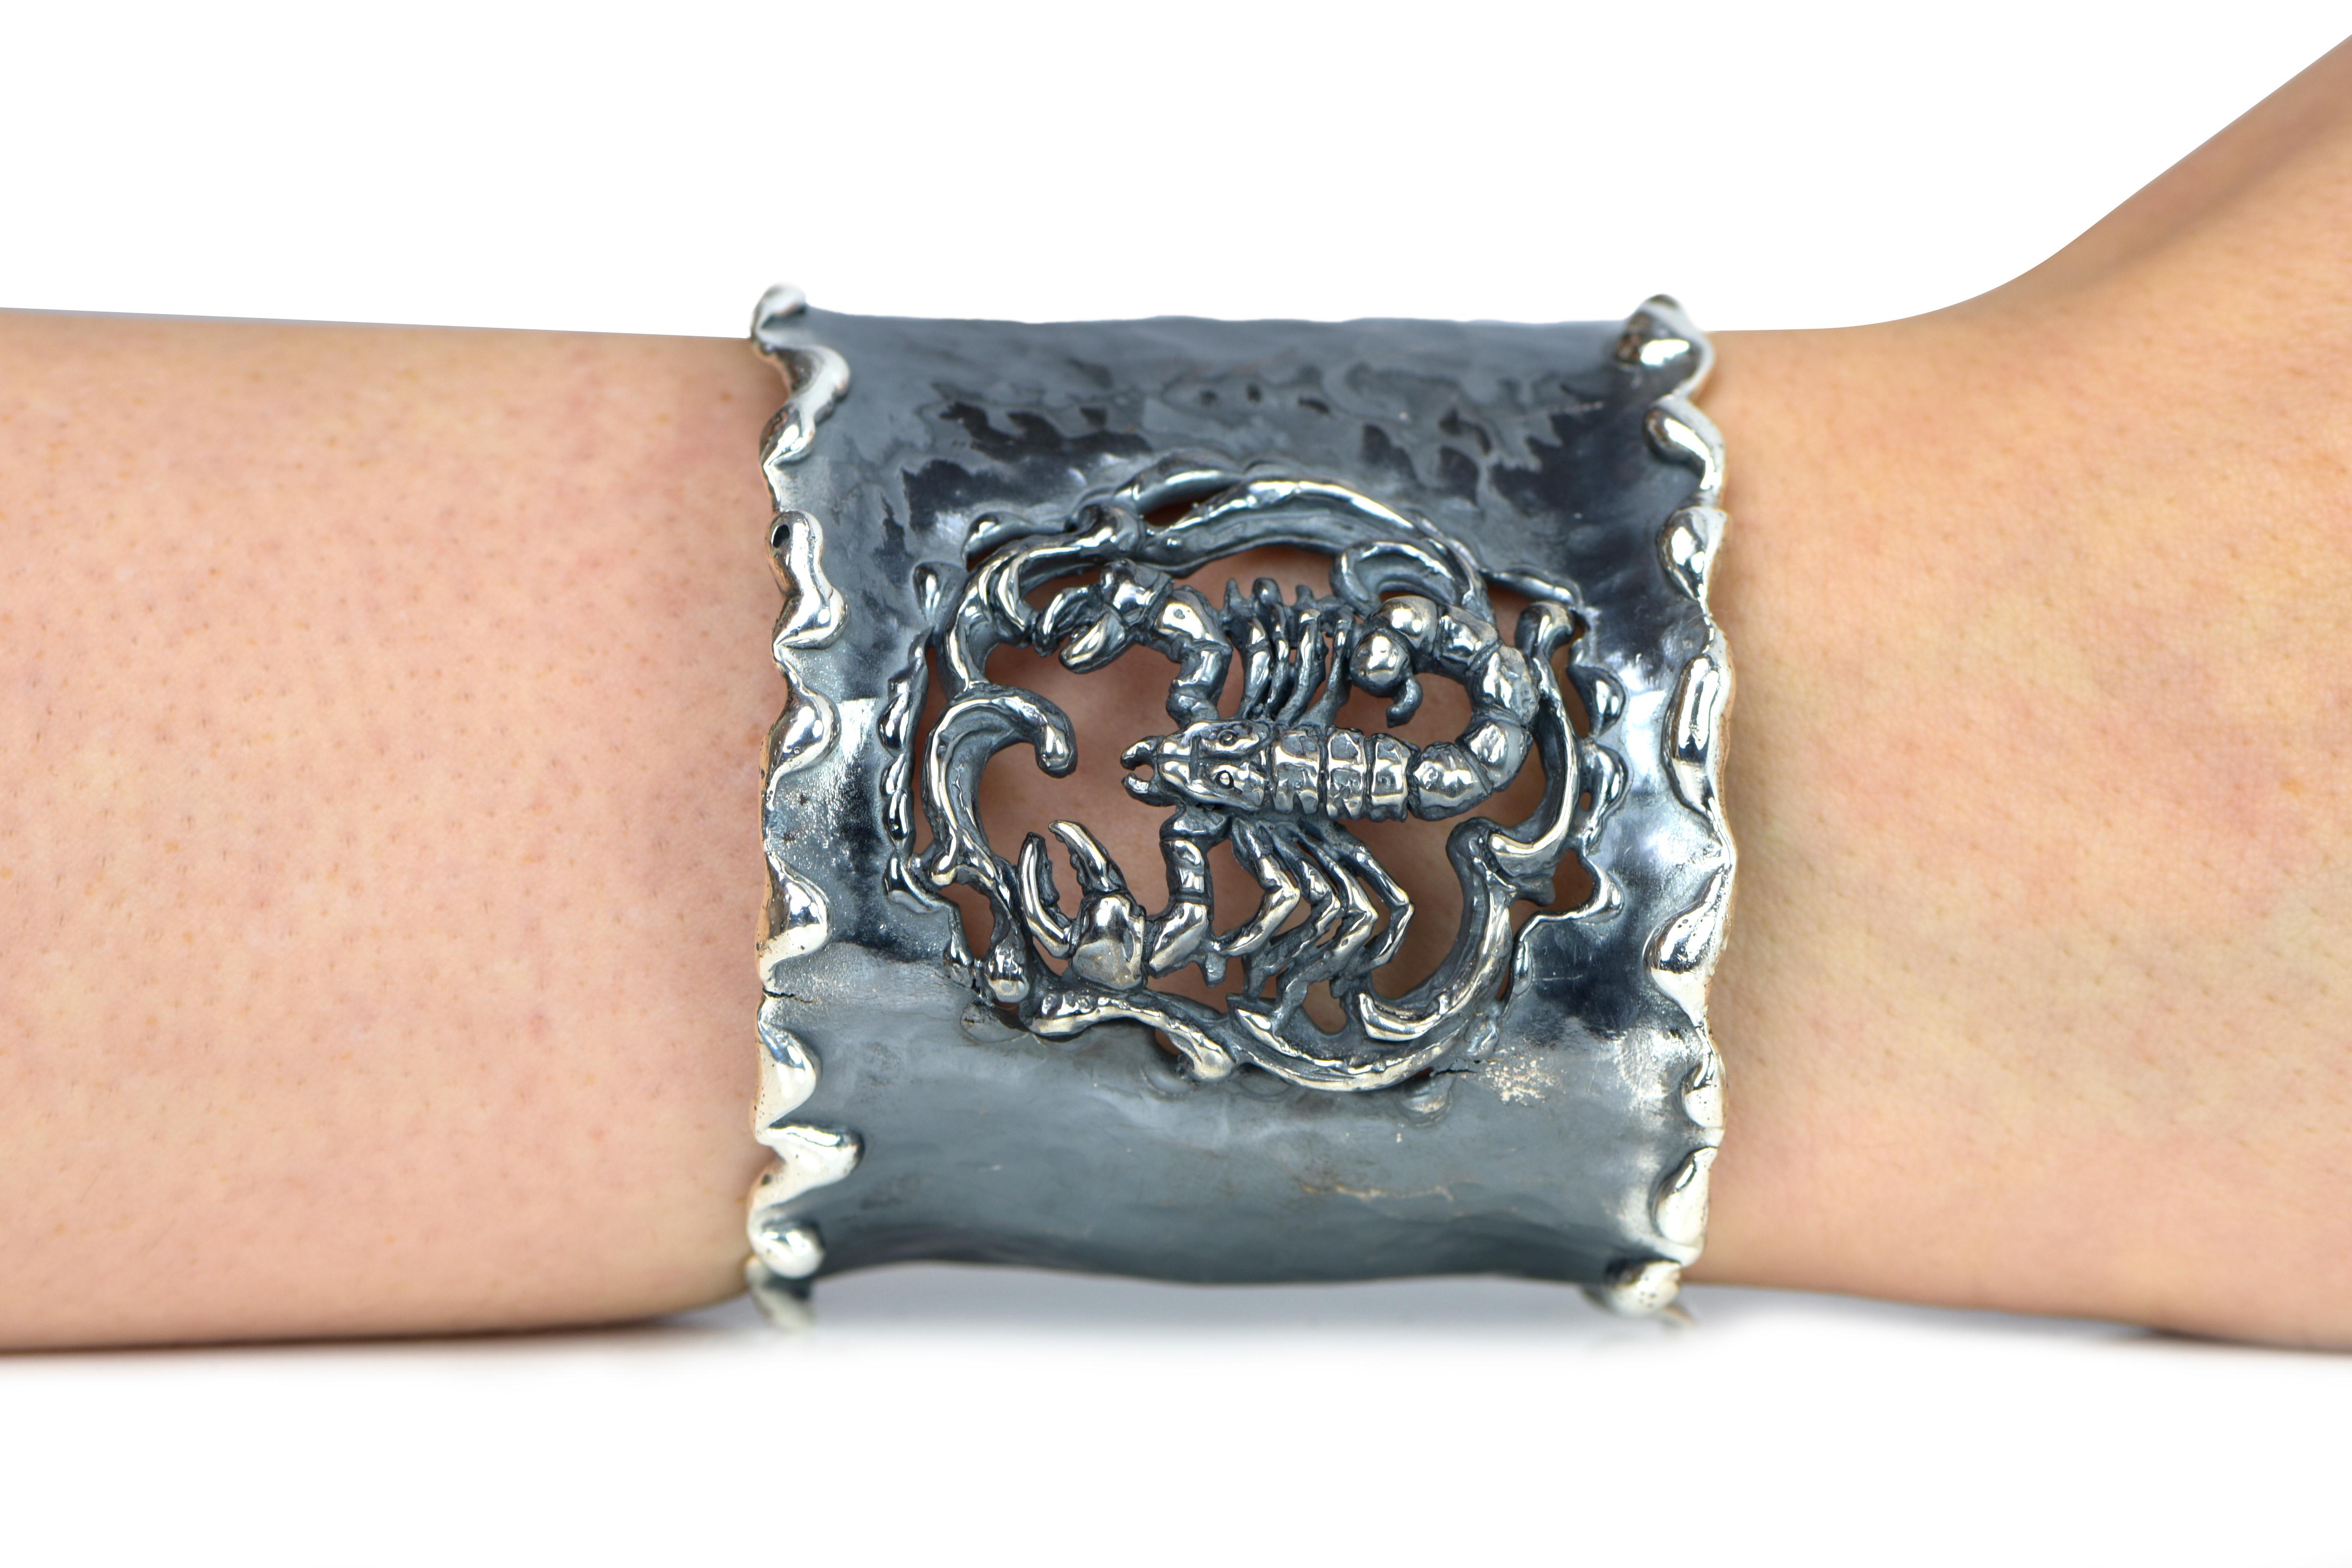 Hand Forged Silver Scorpio Adjustable Cuff Bracelet. About 2.5 inches wide. The metal does not contain any additional alloys that could compromise the strength or quality of the piece. Each Organic Silver Cuff Bracelet takes about 8 hours to